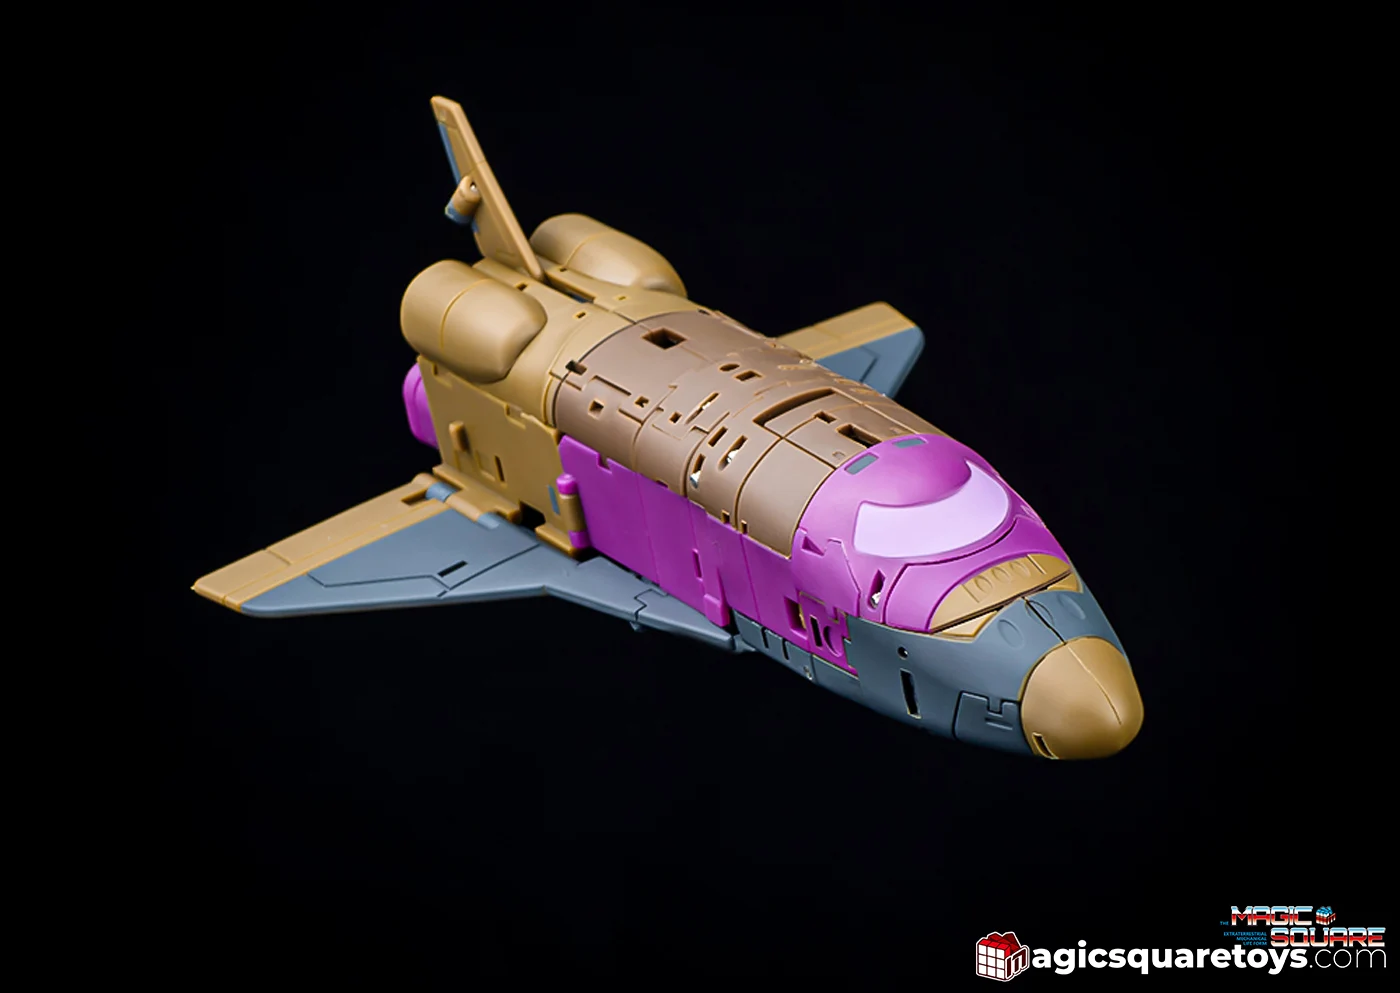 Magic Square Toys MS-B55 Space Shuttle, Transformers Blast Off homage, 5th member of the Bruticus homage.